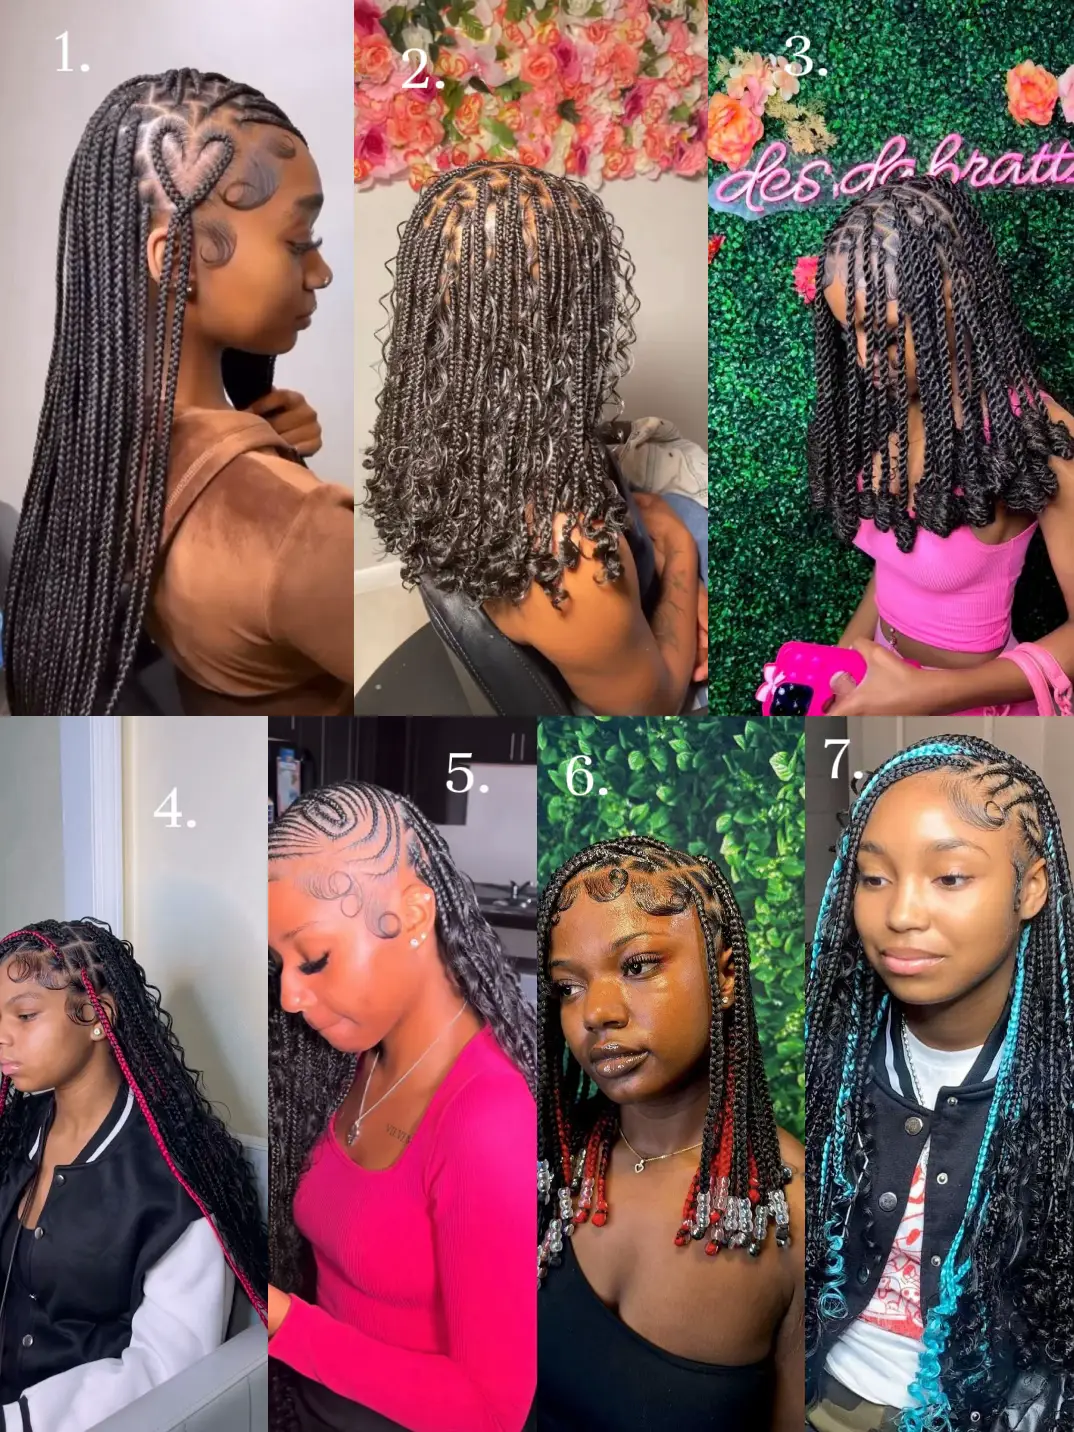  A collage of photos of women with braids.